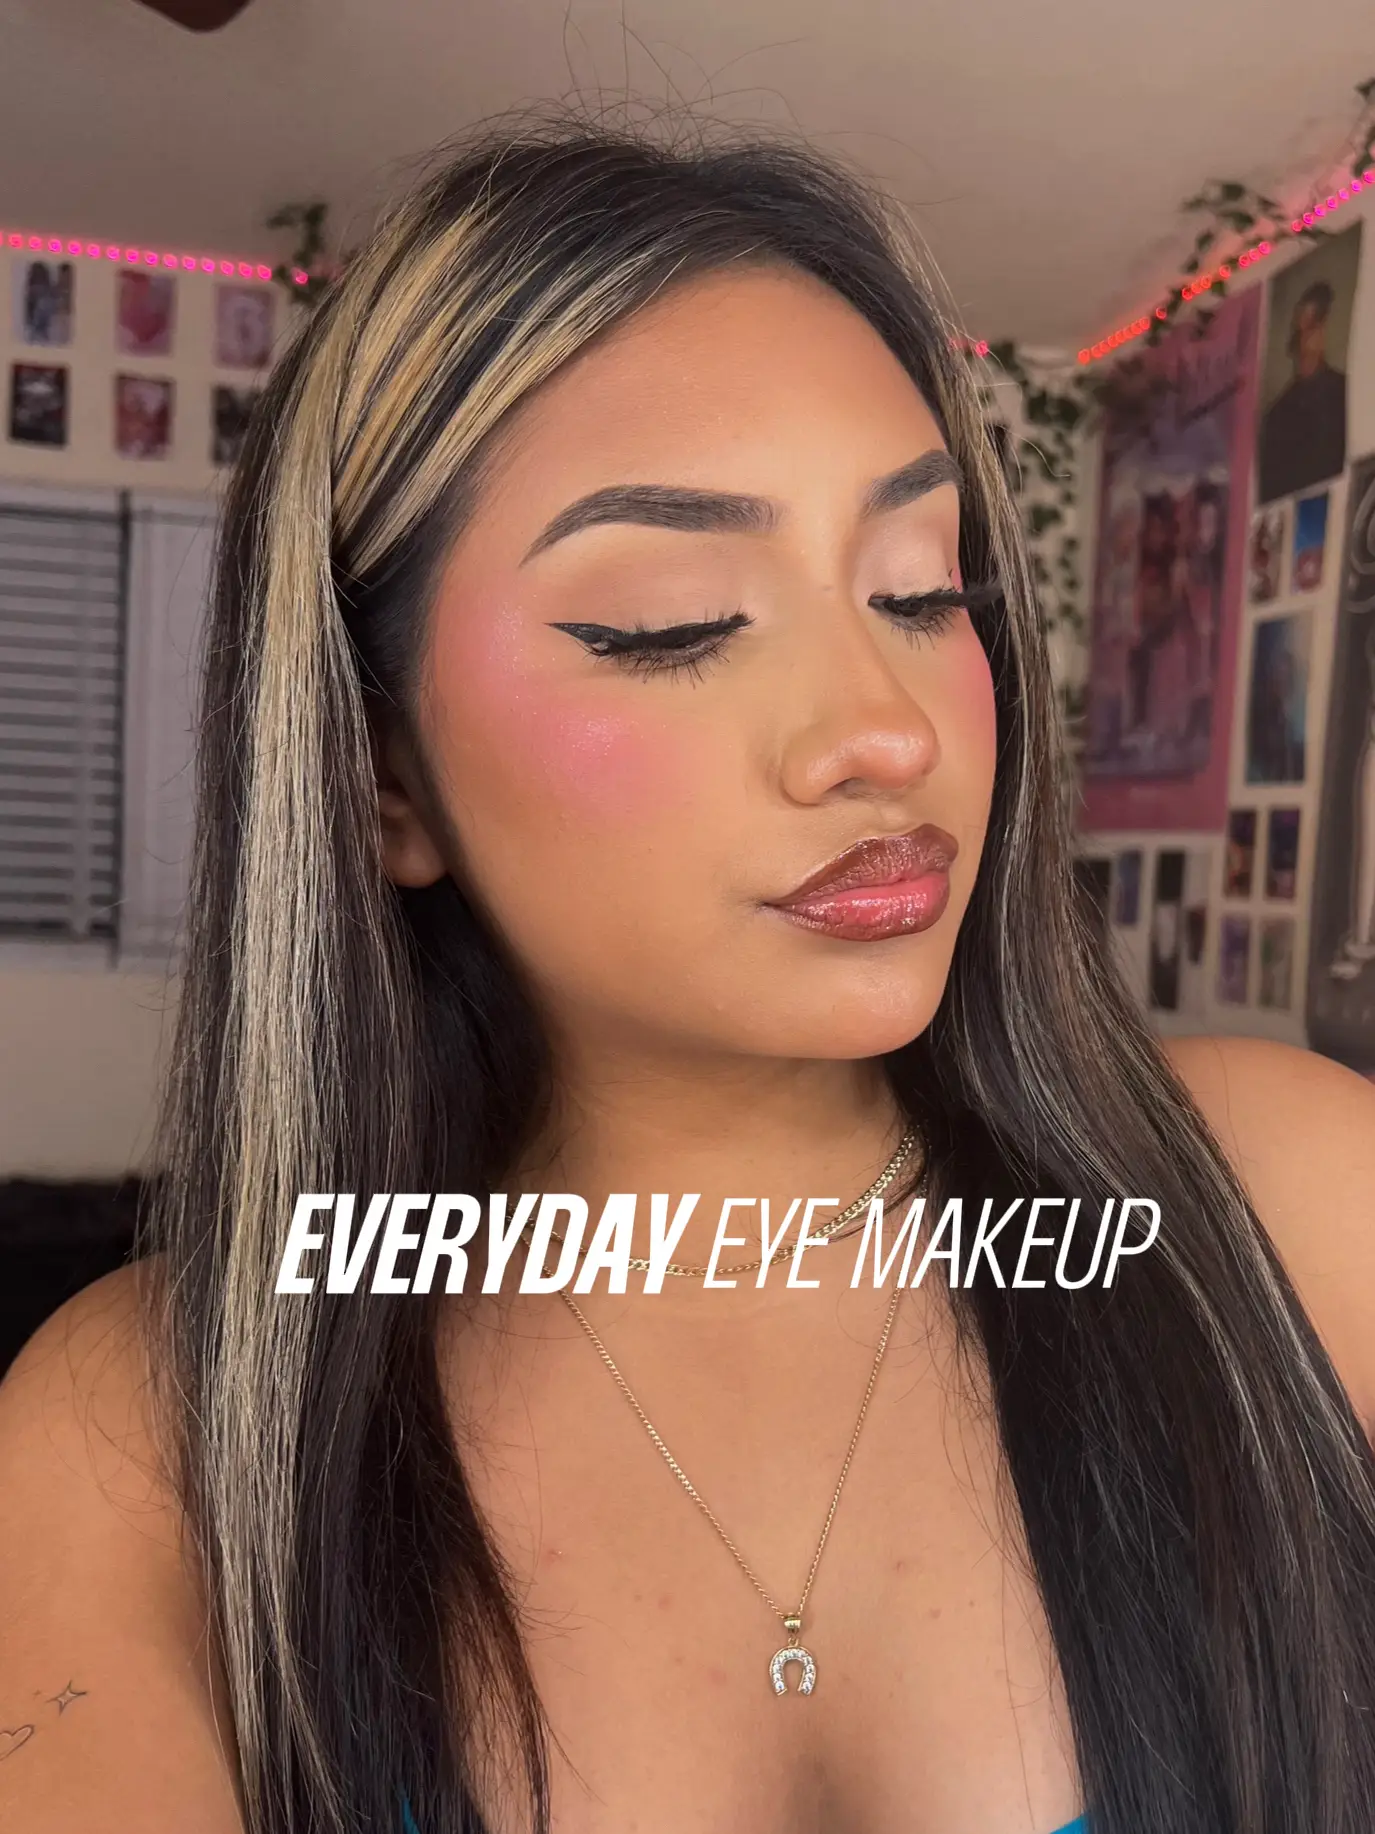 Eden._rose routine - Lemon8 Search makeup easy from